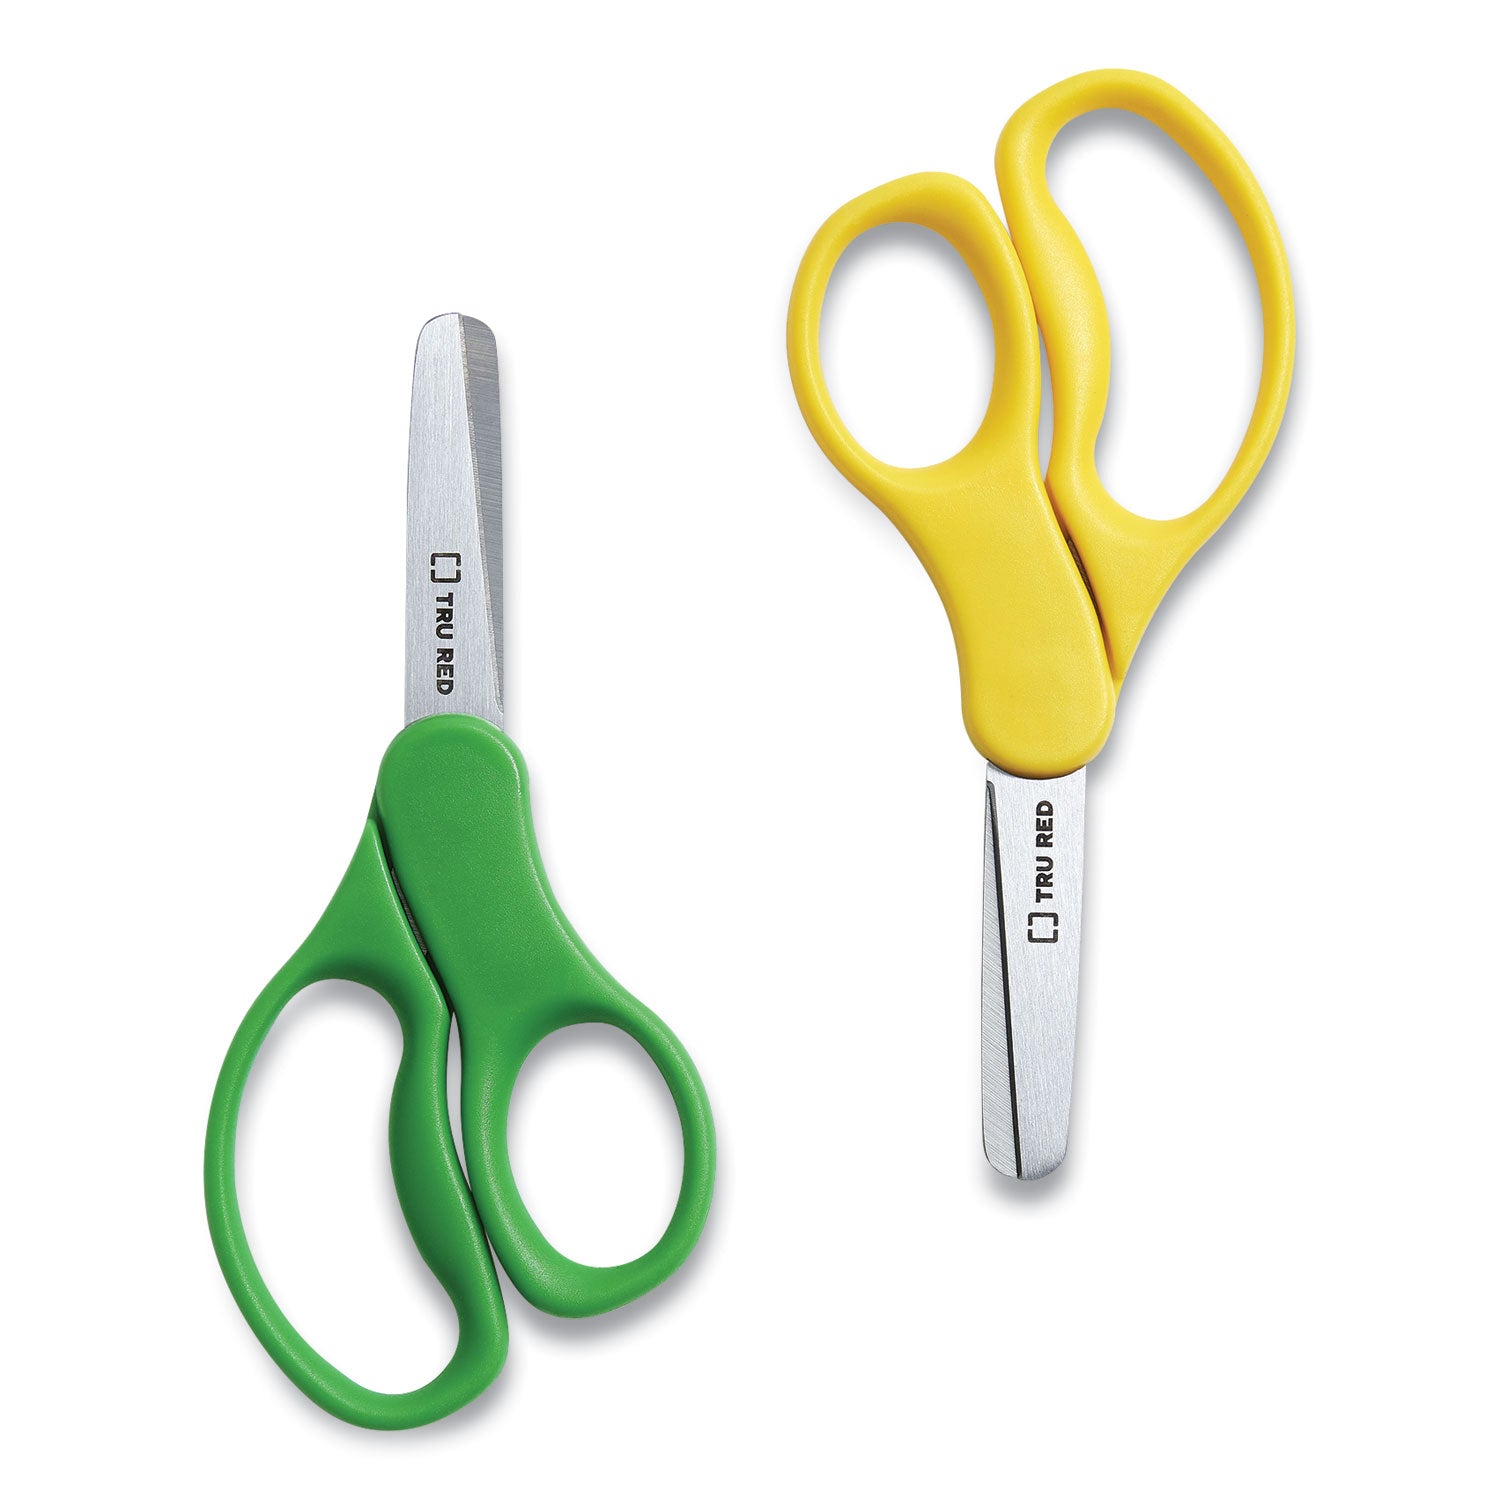 kids-blunt-tip-stainless-steel-safety-scissors-5-long-205-cut-length-green;-yellow-straight-handles-2-pack_tud24380501 - 1